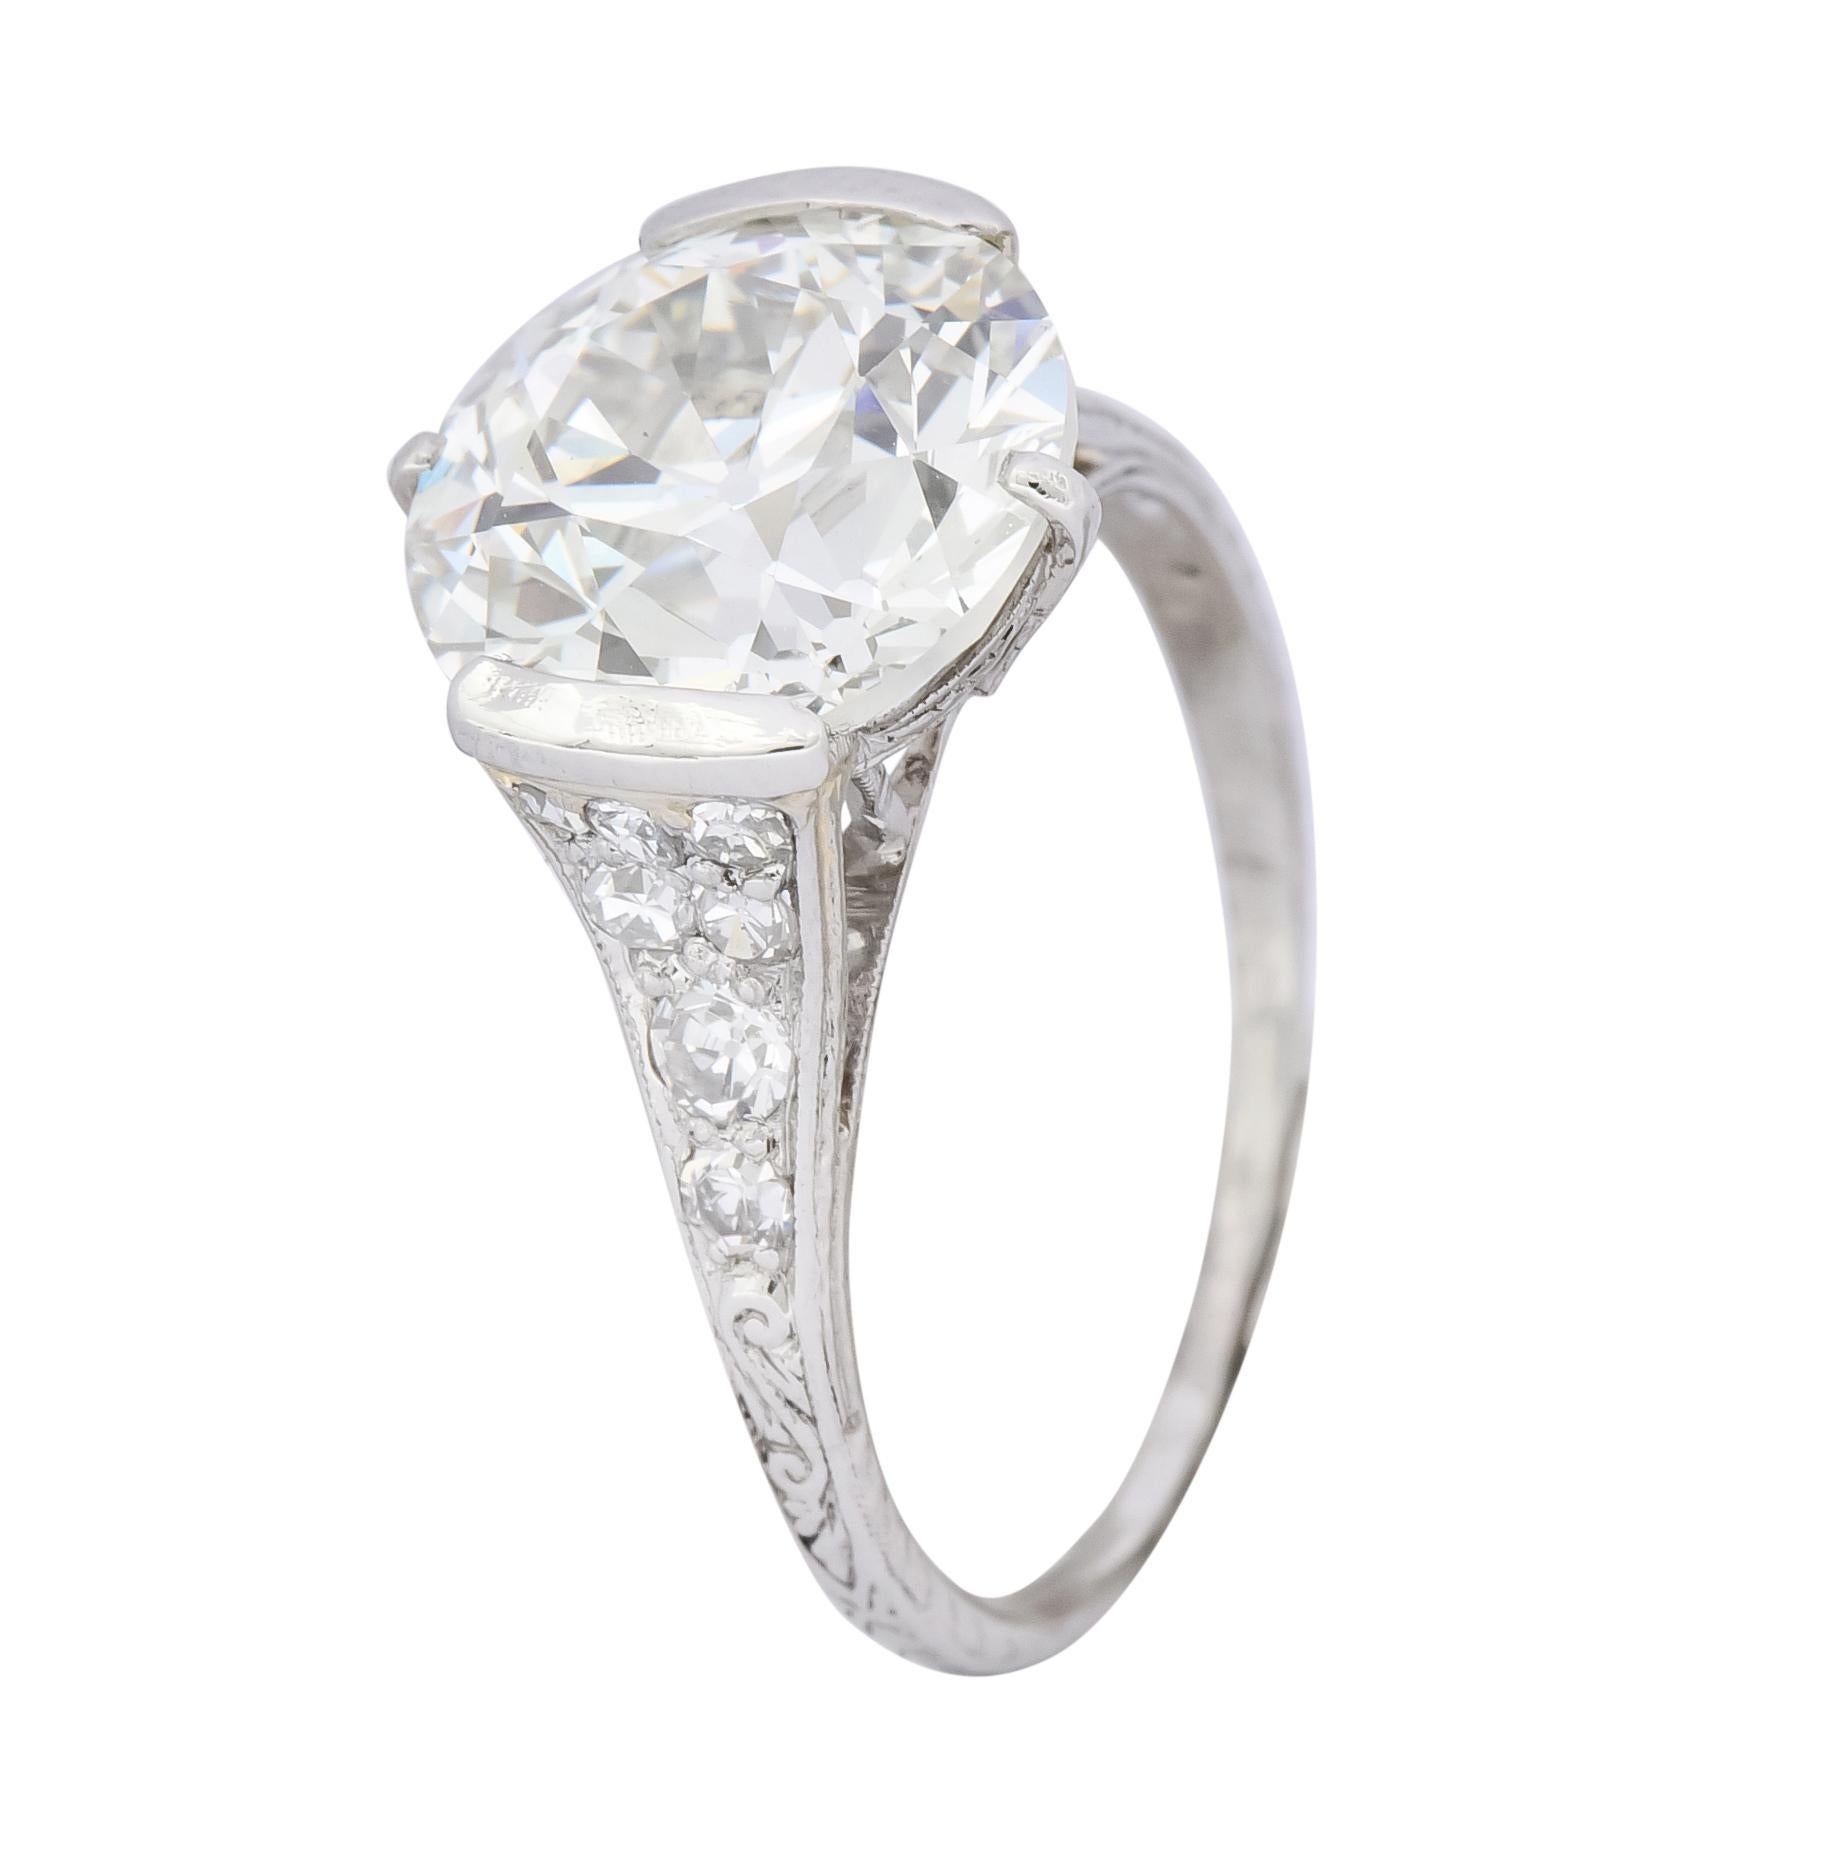 Centering a half bezel set old European cut diamond weighing 4.82 carats total, J color and VS2 clarity

Flanked by single cut diamonds, pavé set in shoulders, weighing approximately 0.55 carat, H to J color and VS clarity

Cathedral basket style